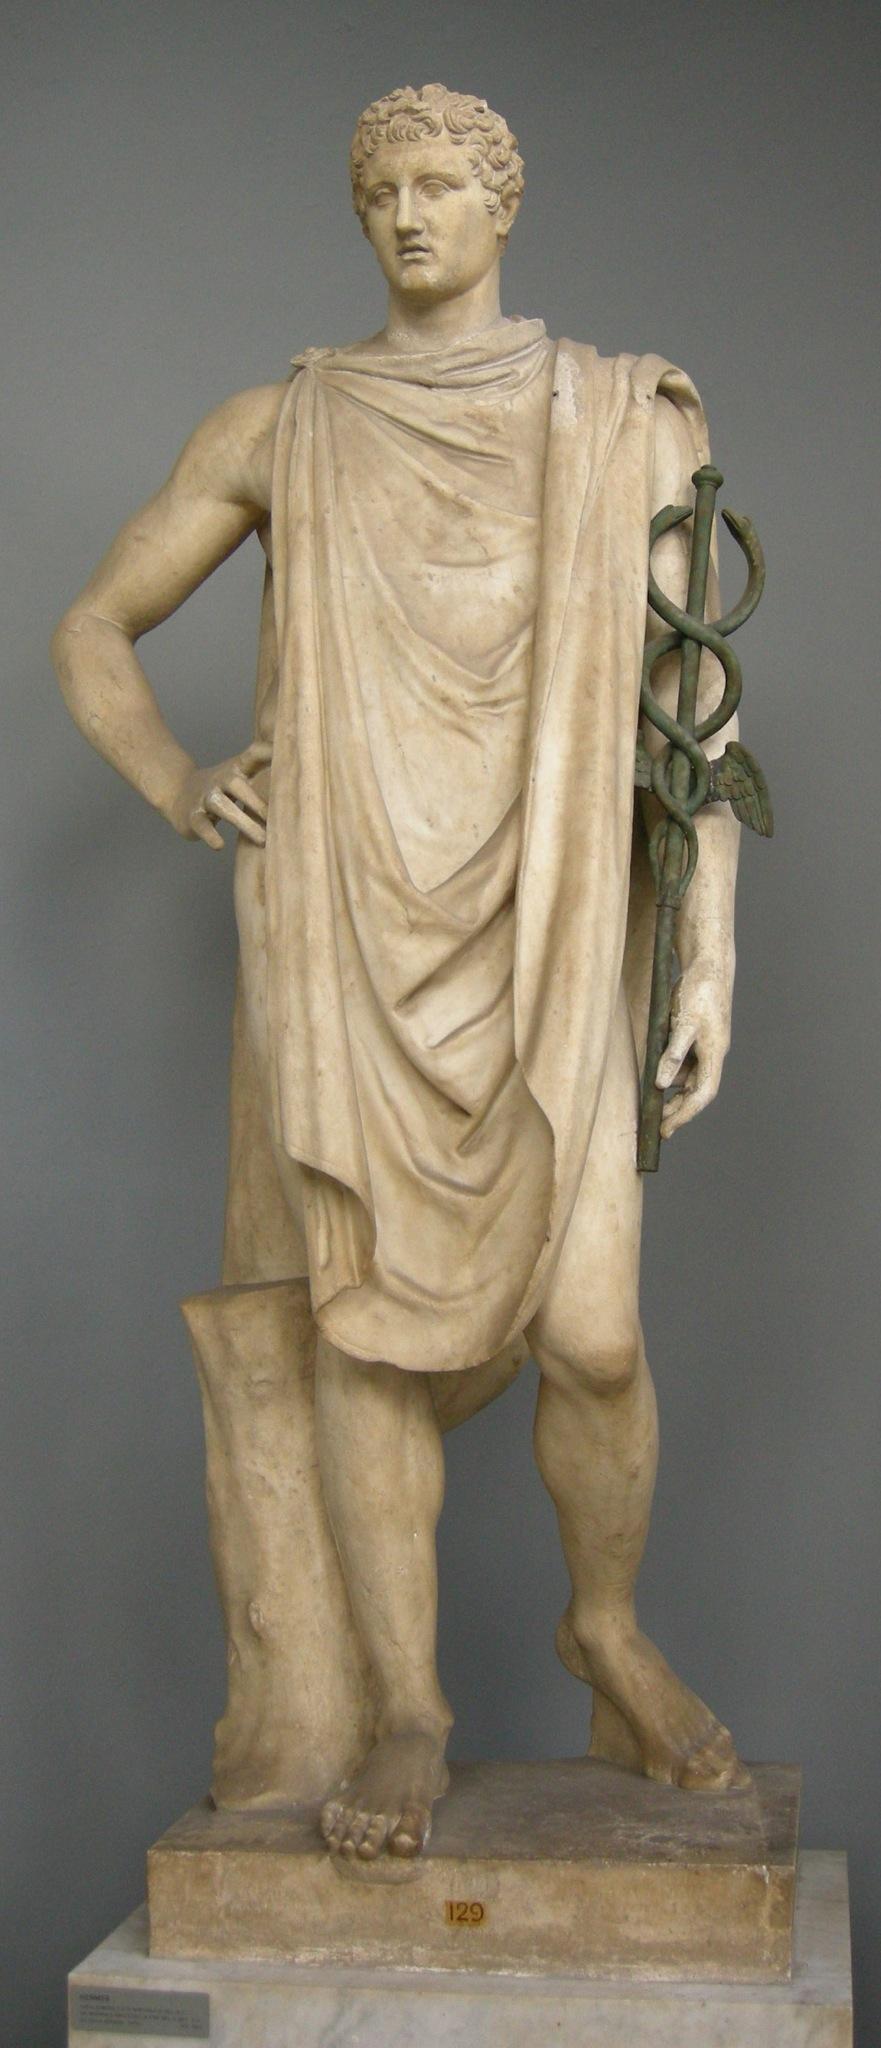 Myth of Hermes When he was still an infant, he left his cradle and went to Piera. He wanted to steal the cattle from his half-brother, Apollo.